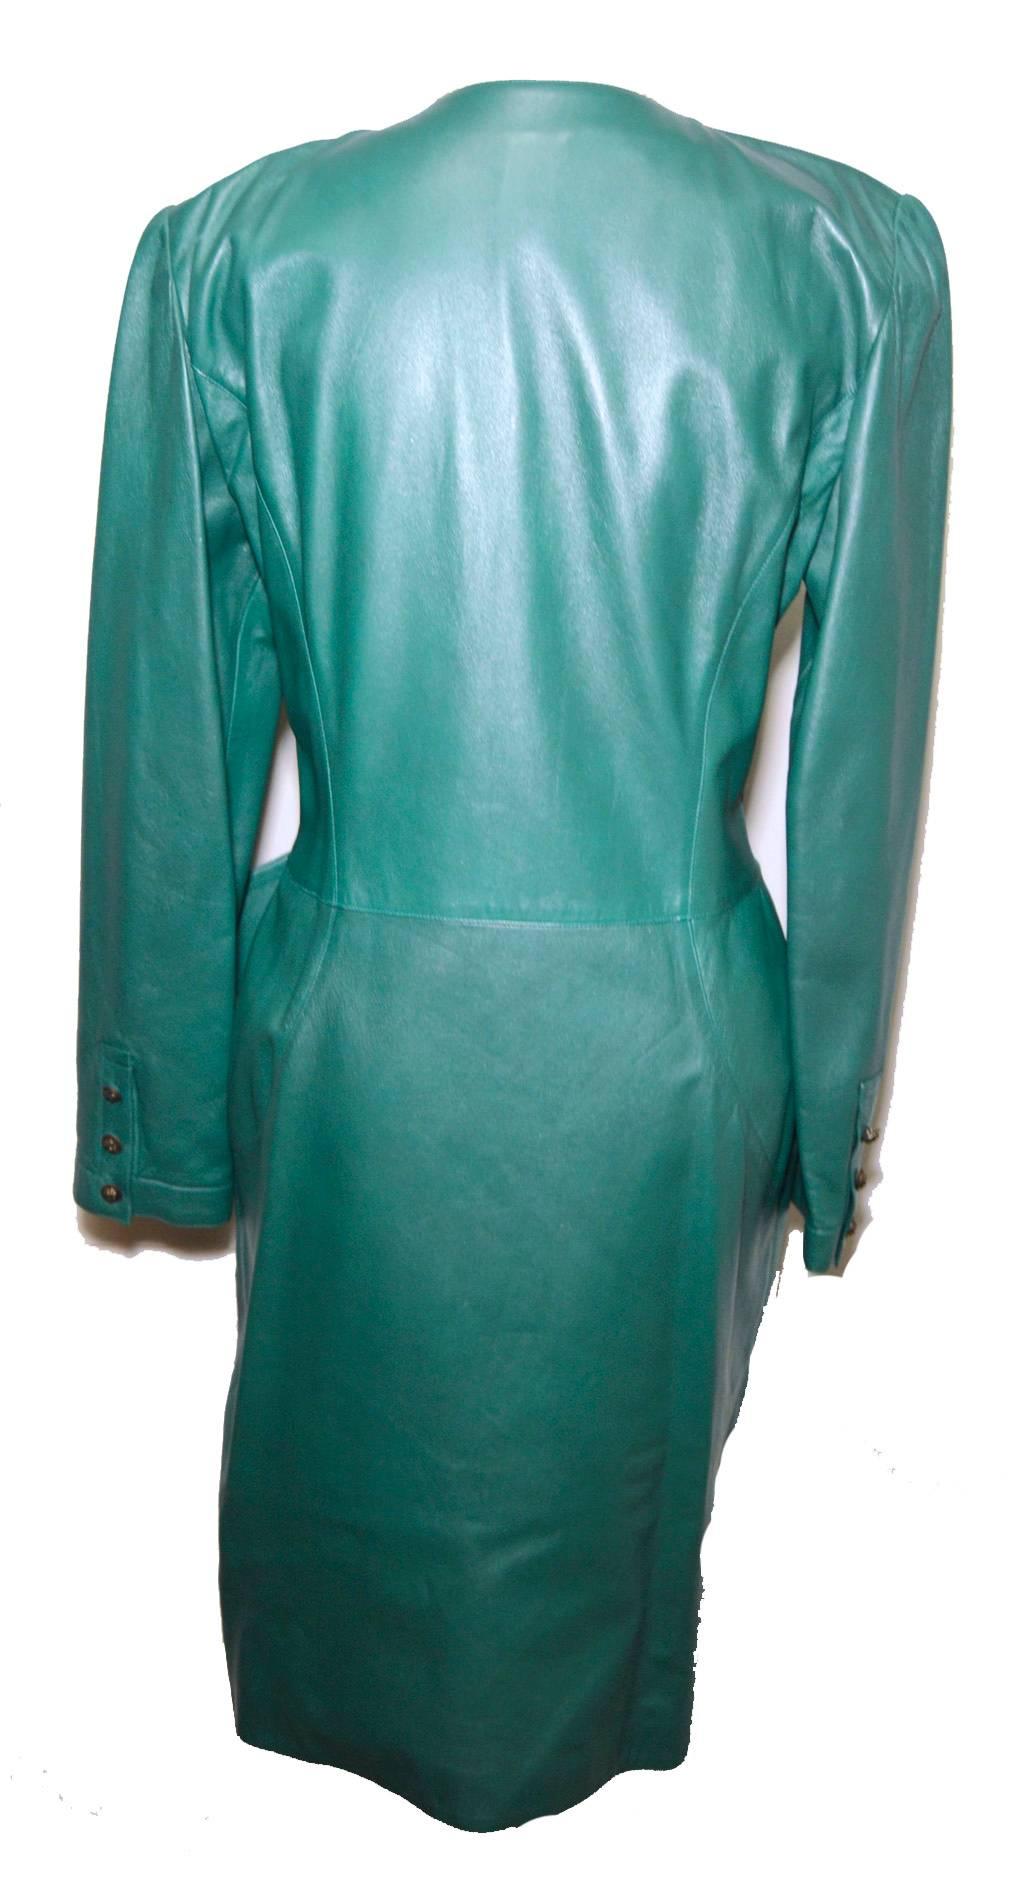 Gorgeous green leather wrap dress by Ungaro from the 1980s.  100% genuine leather. Wrap dress style with 10 side front bronze button closures. Unique angled leather detail along front side skirt panel.  2 front pockets. Fully lined with matching